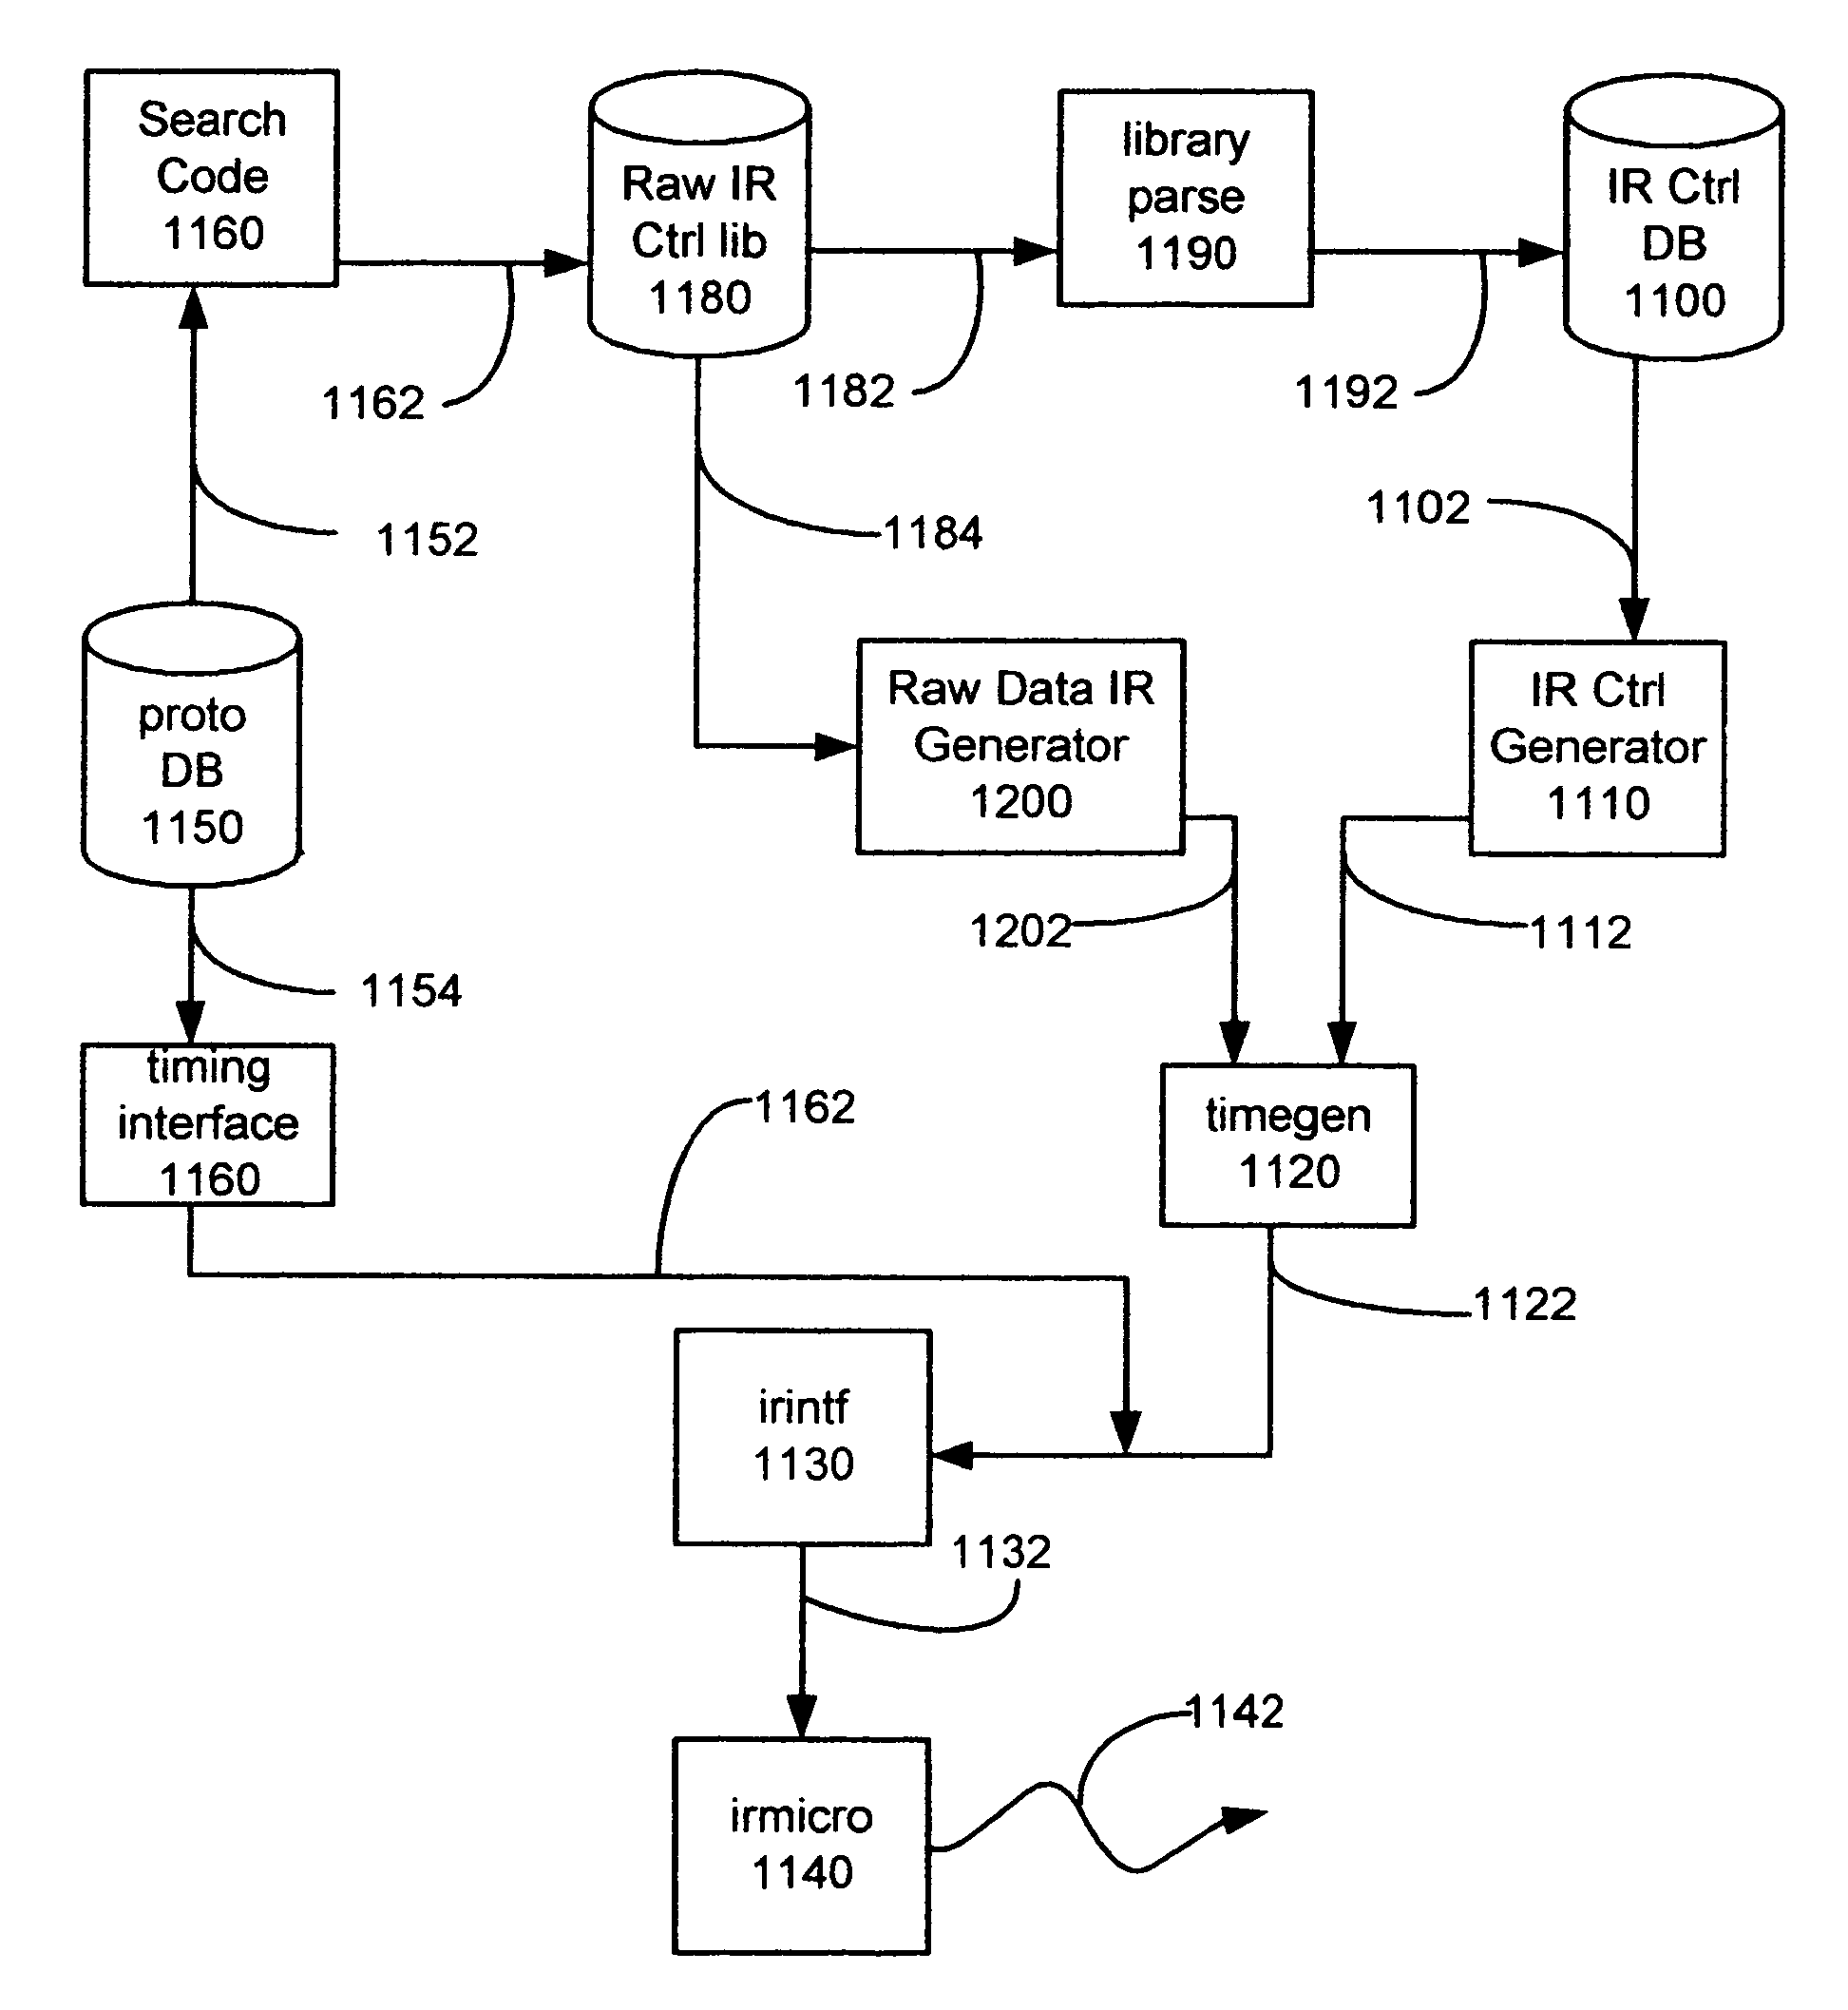 Method and apparatus for controlling at least one set-top box